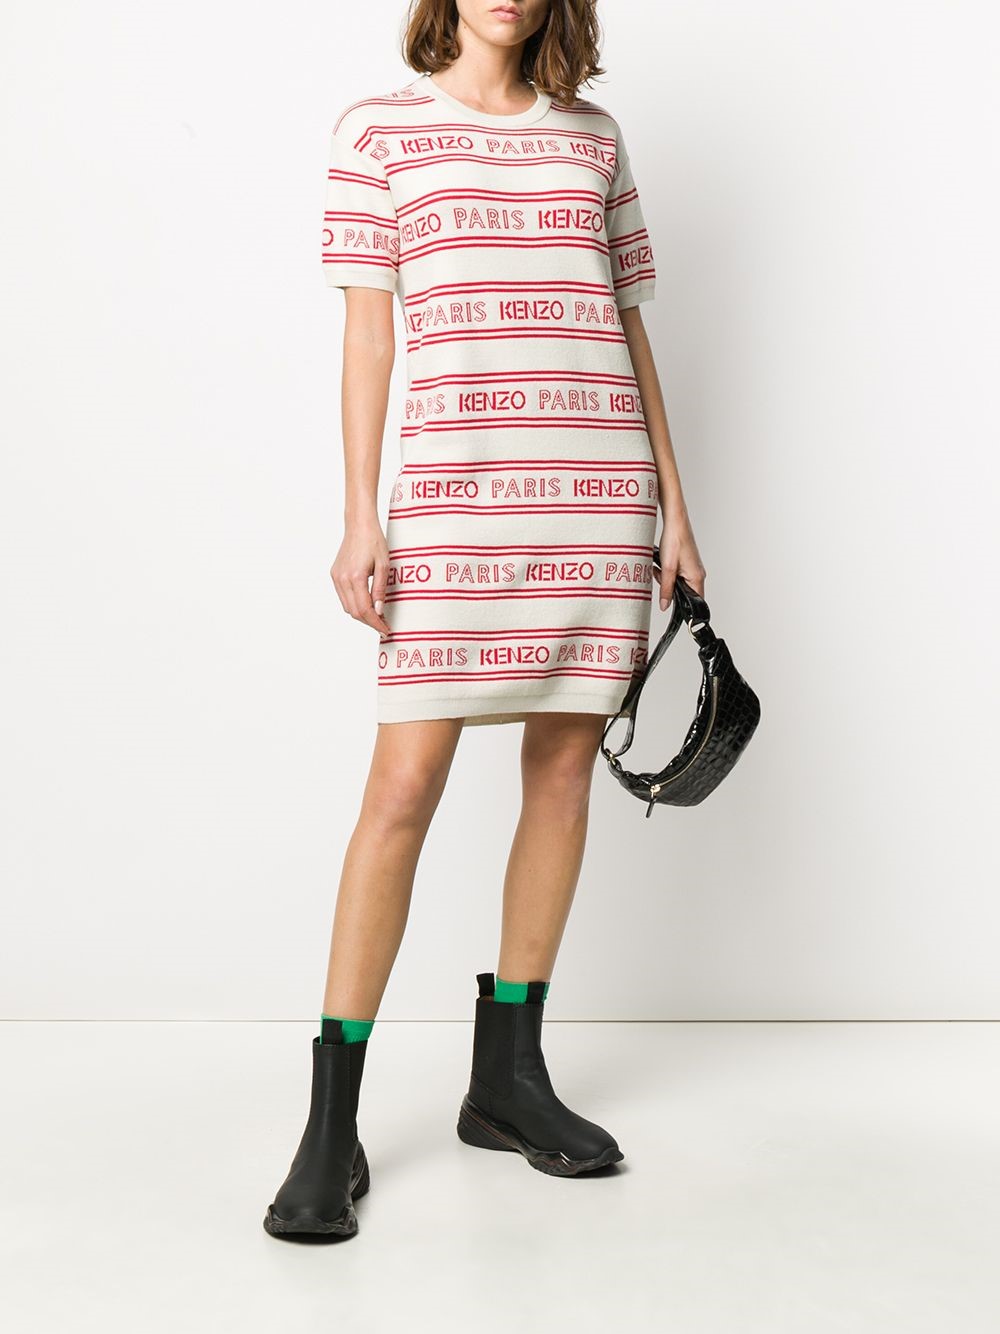 Kenzo Logo Dress Available On Montiboutique Com 32612